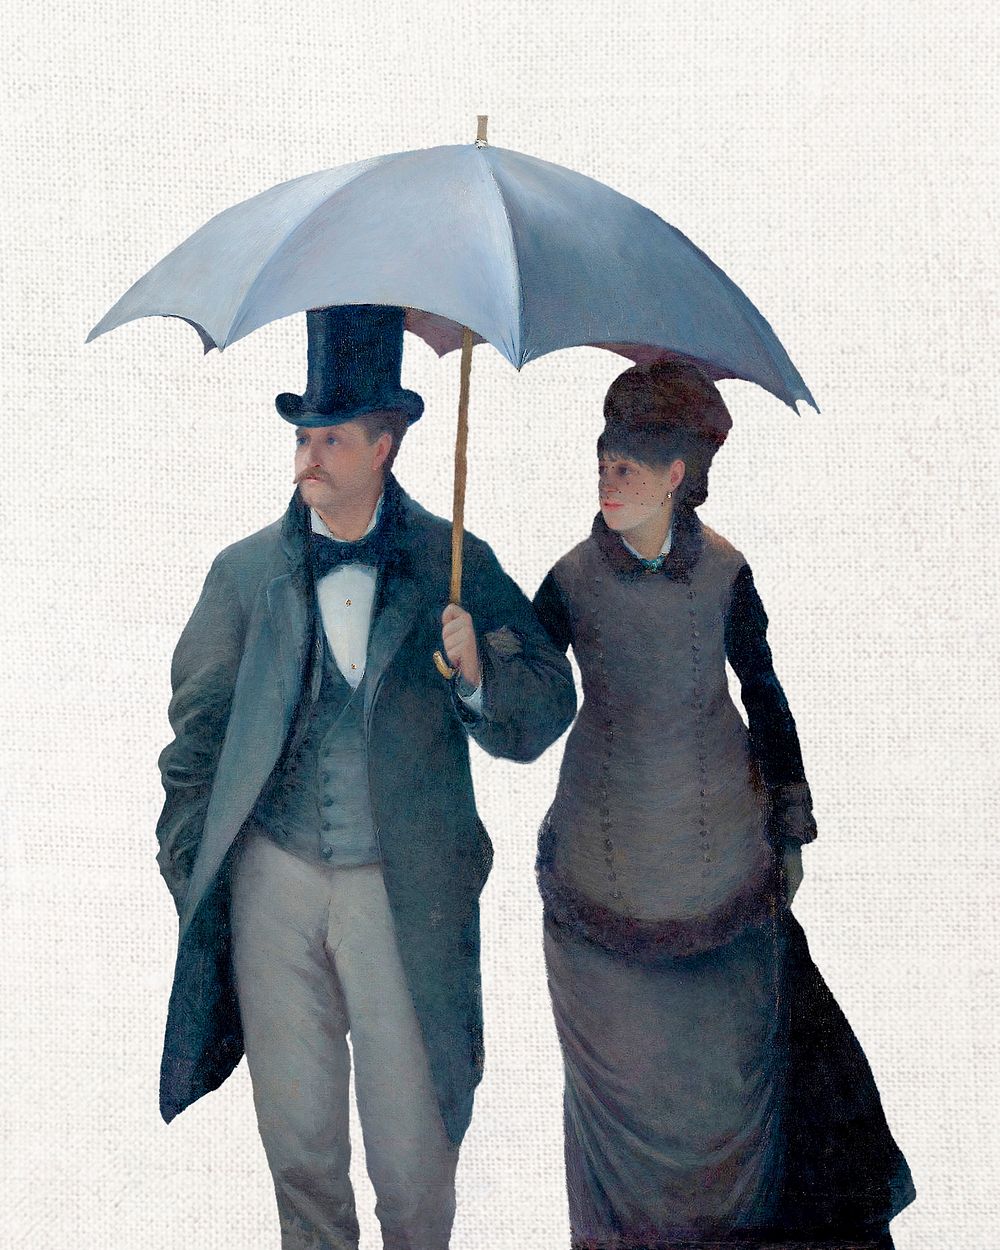 Paris Street Rainy Day clipart, Gustave Caillebotte's famous painting psd, remastered by rawpixel